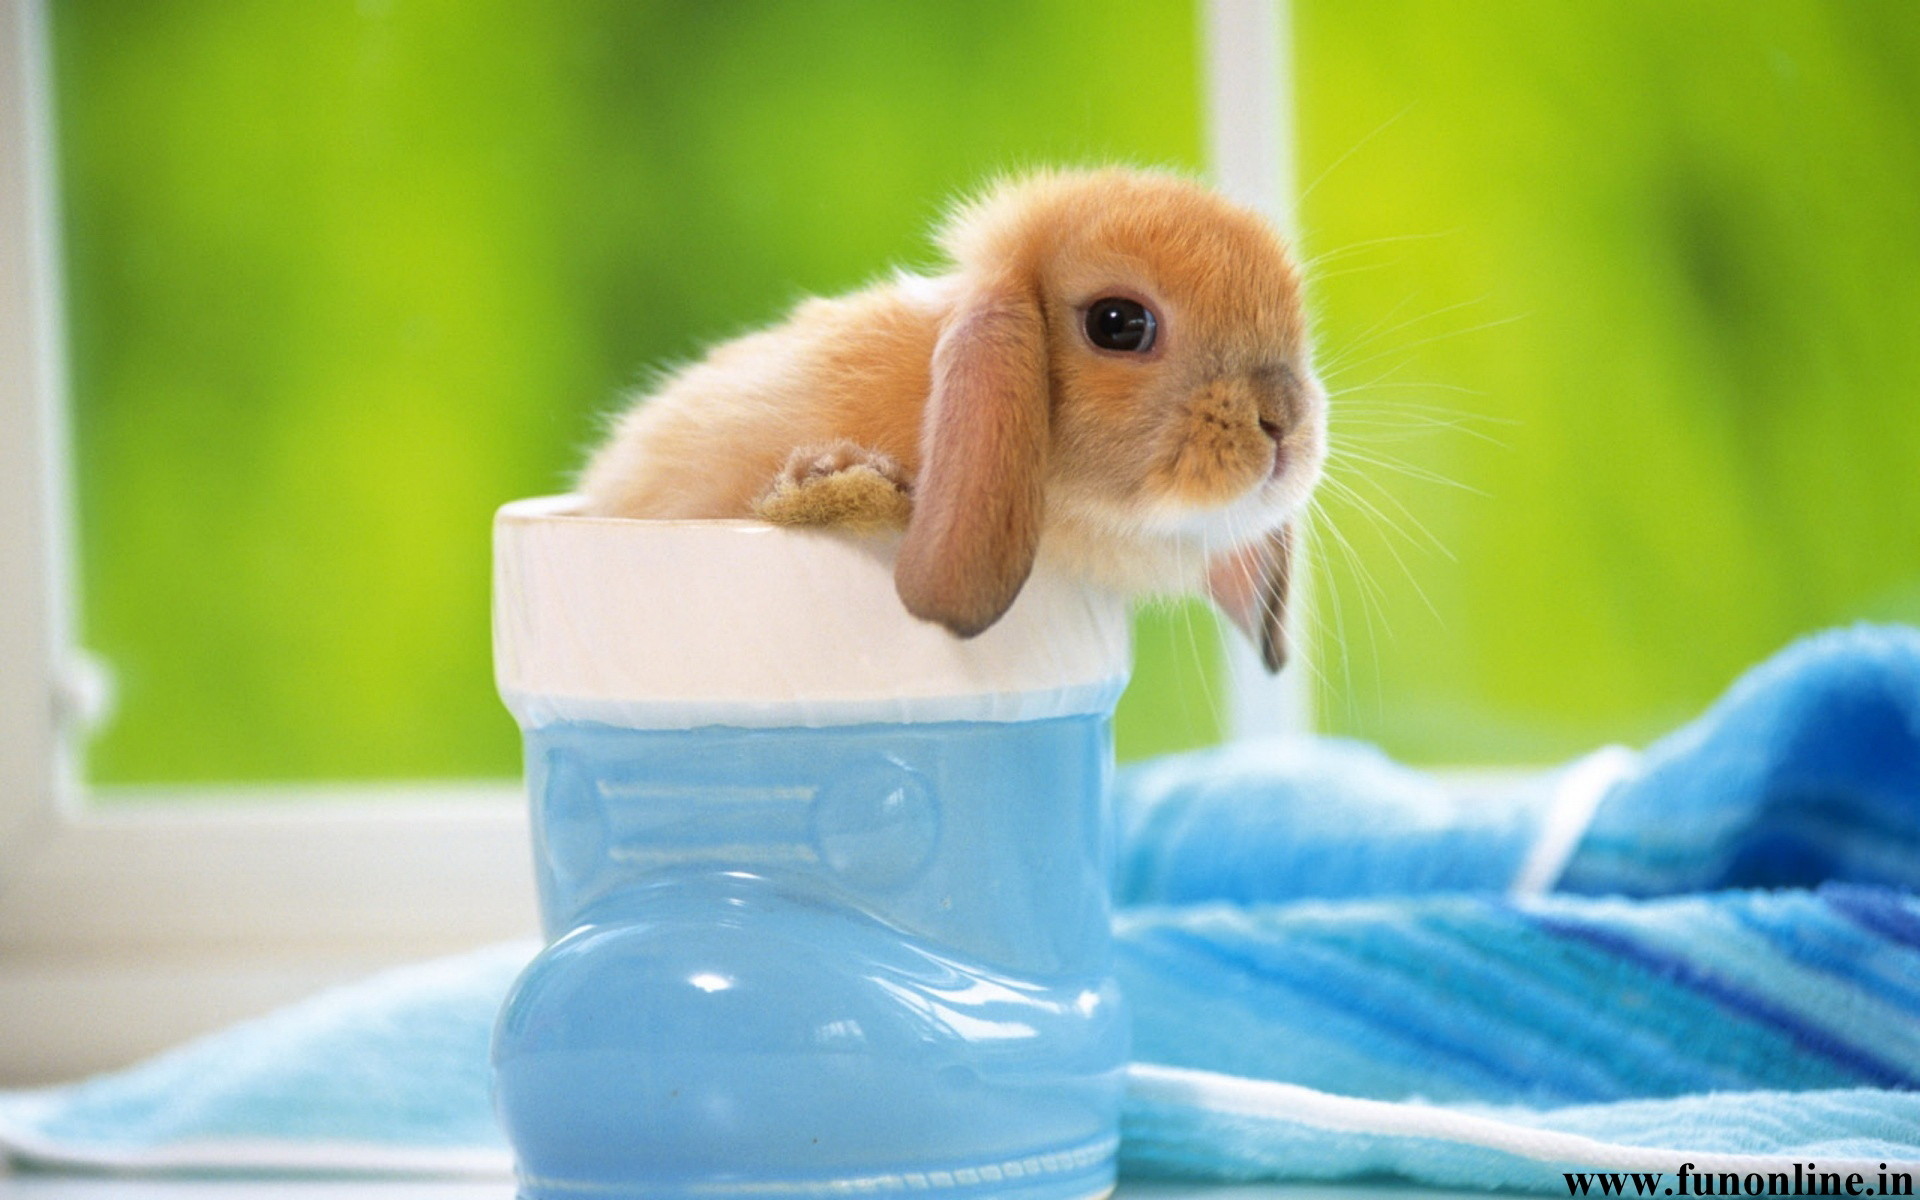 Rabbit Wallpapers, Download Free Cute Baby Rabbits - Baby Bunny Wallpaper Hd - HD Wallpaper 